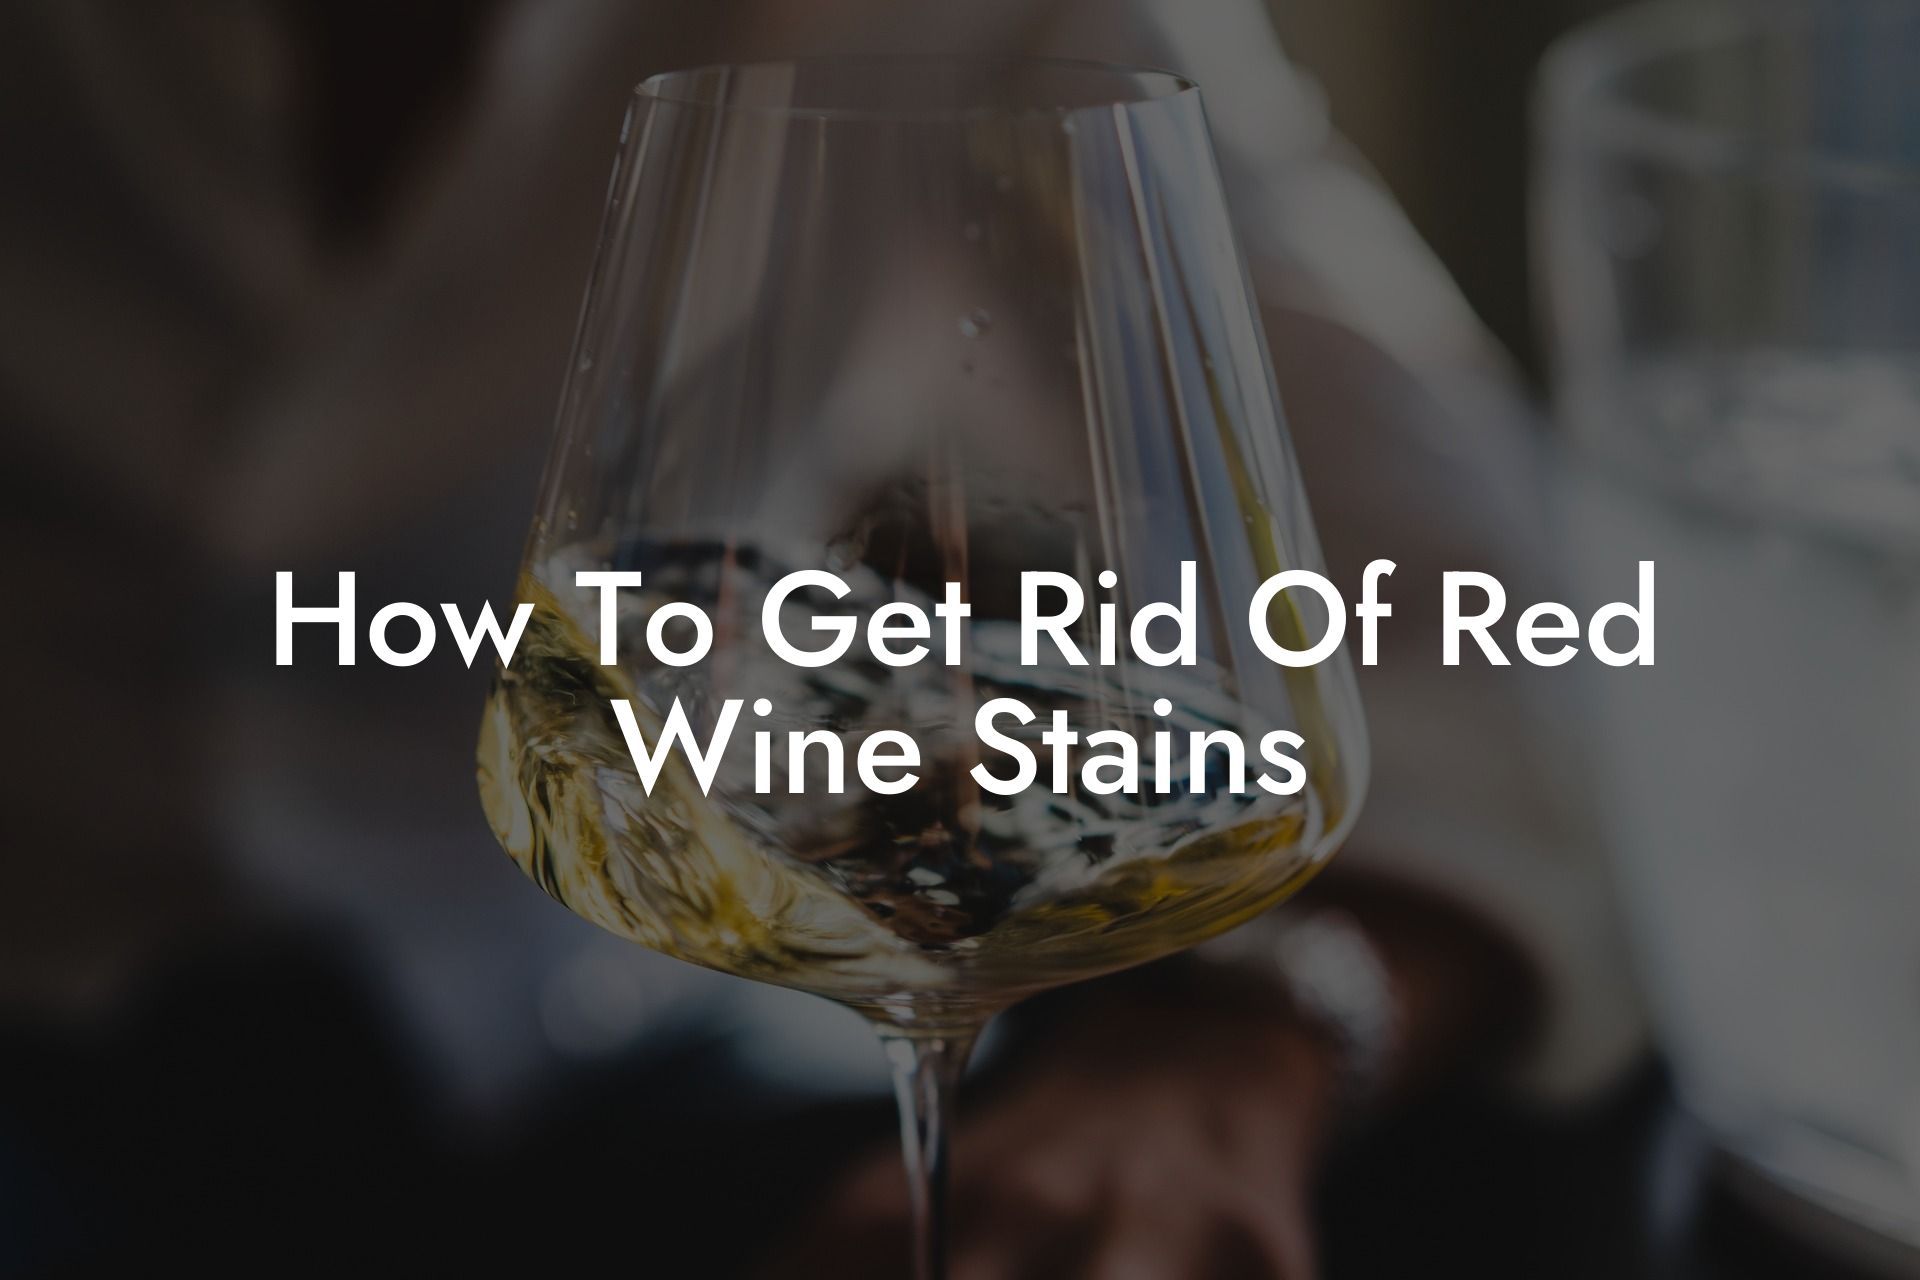 How To Get Rid Of Red Wine Stains